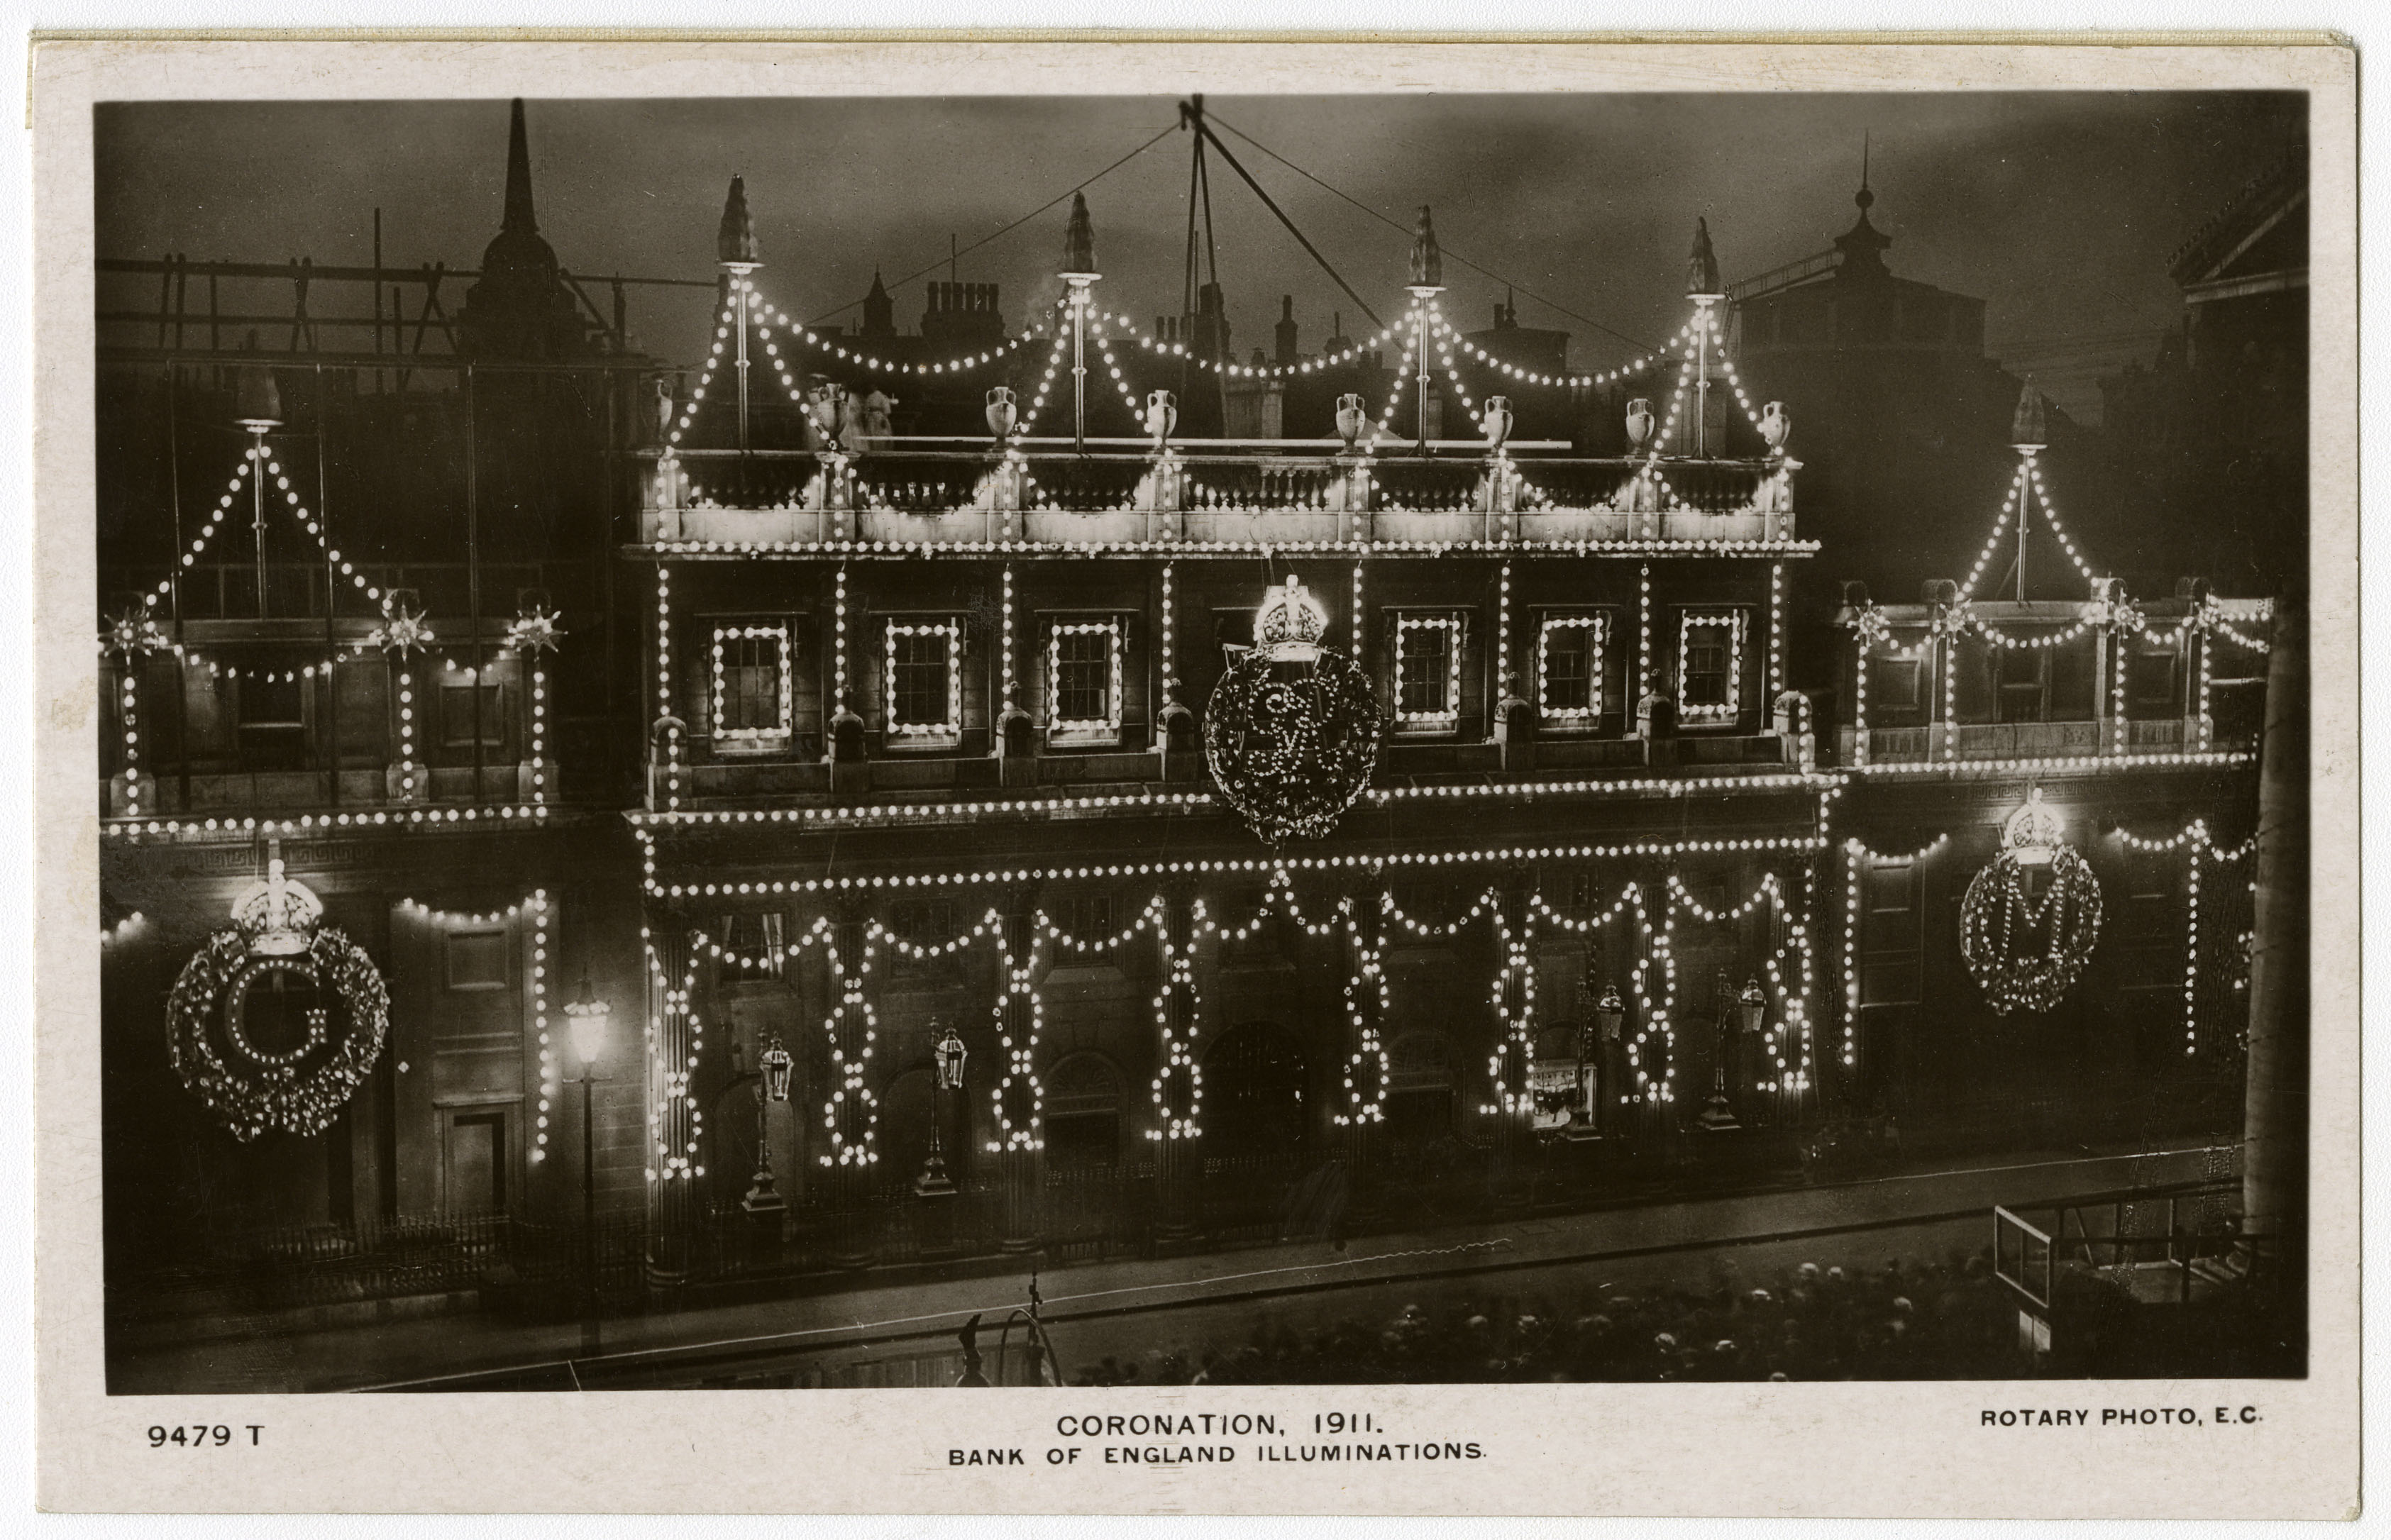 A black and white photograph of the Bank of England at Threadneedle Street at night. The Bank is decorated with strings of lights for the coronation of George V in 1911. The illuminated banners and strings out lights show up clearly against the darkness.